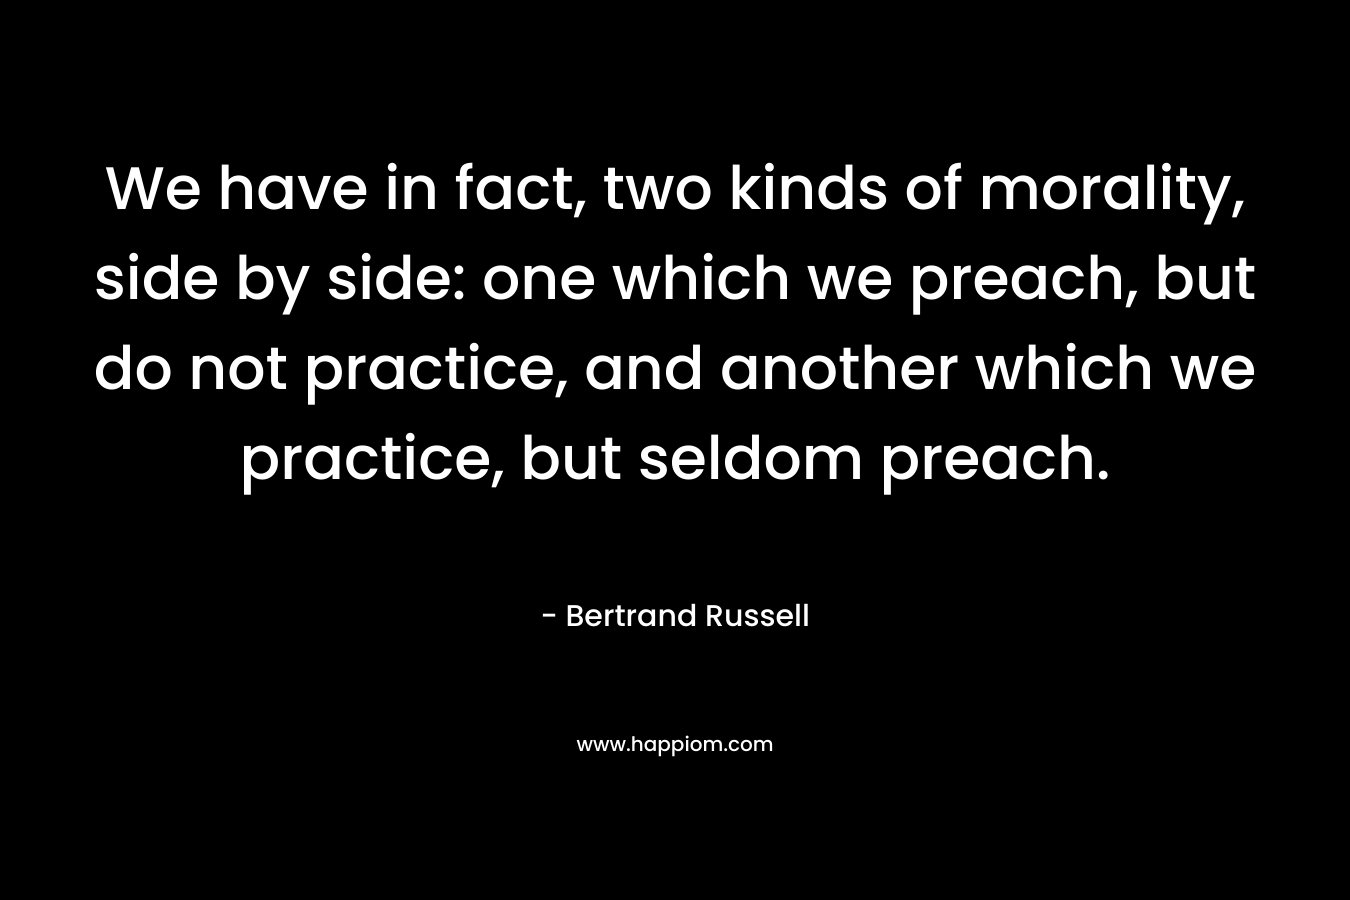 We have in fact, two kinds of morality, side by side: one which we preach, but do not practice, and another which we practice, but seldom preach.